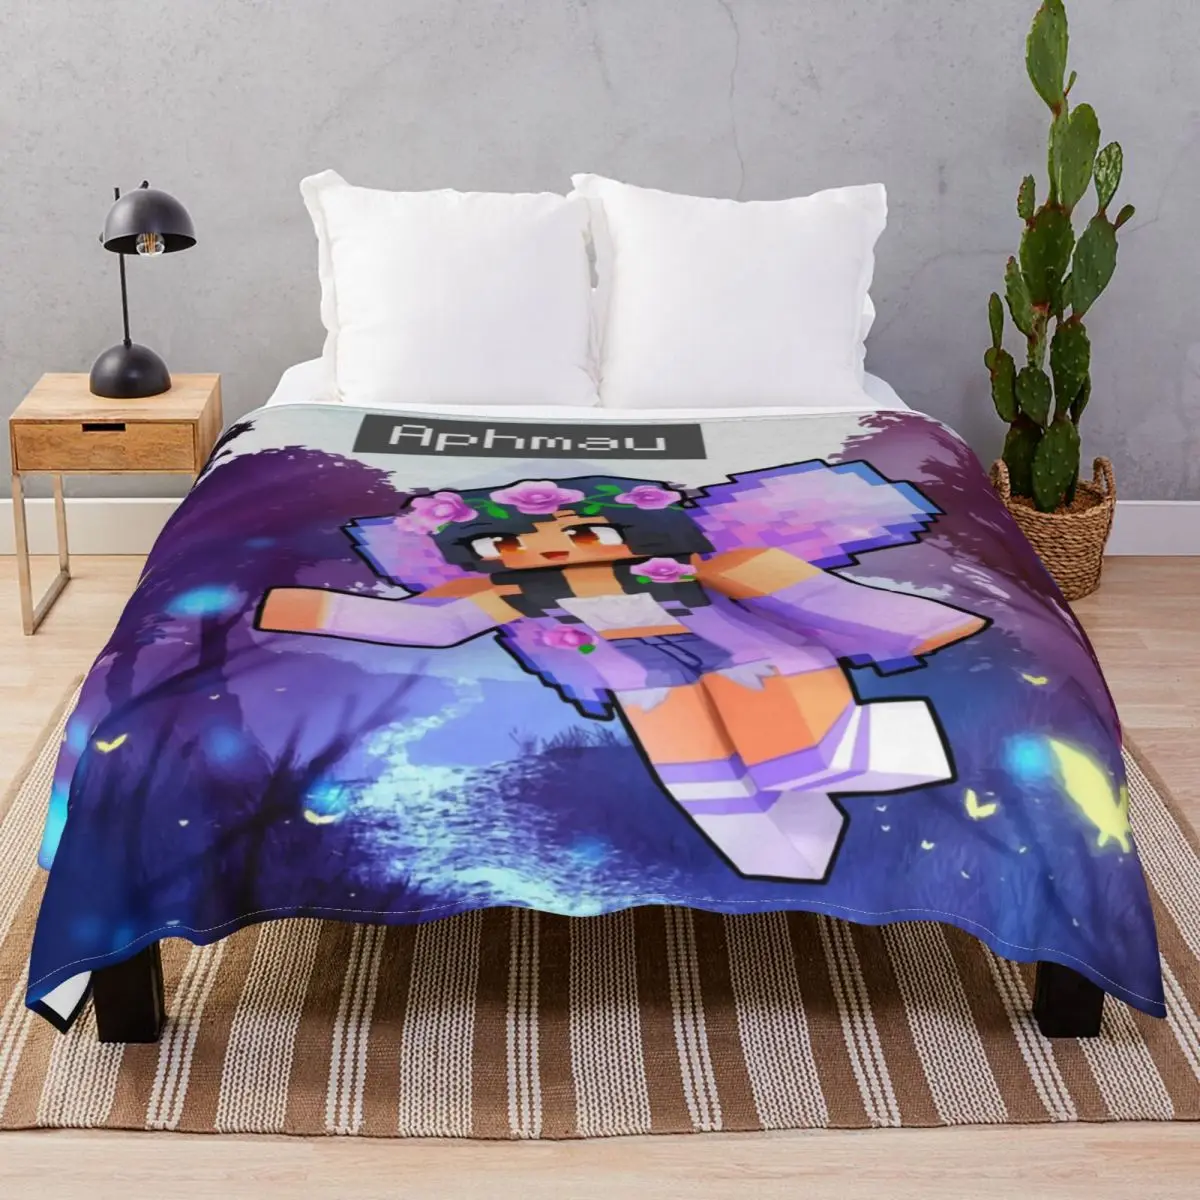 Aphmau Magical Fairy Blanket Flannel Autumn Super Warm Throw Blankets for Bed Home Couch Camp Cinema